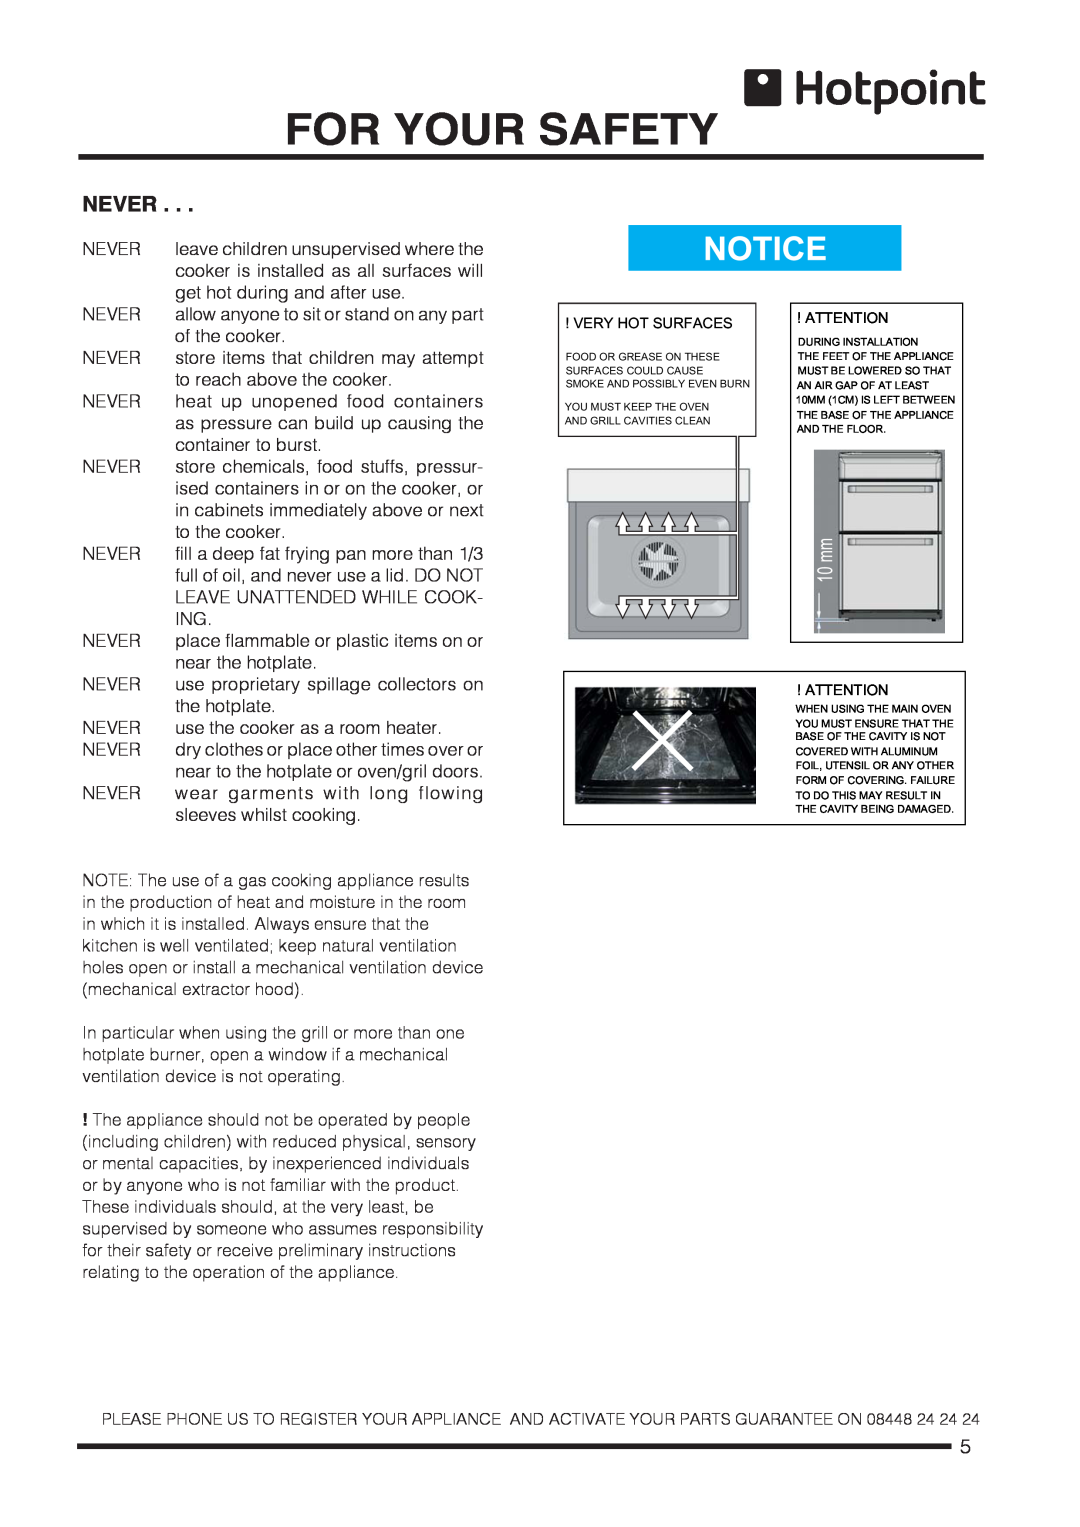 Hotpoint CH60GCIW, CH60GCIS, CH60GCIK installation instructions Never, For Your Safety, Very Hot Surfaces 